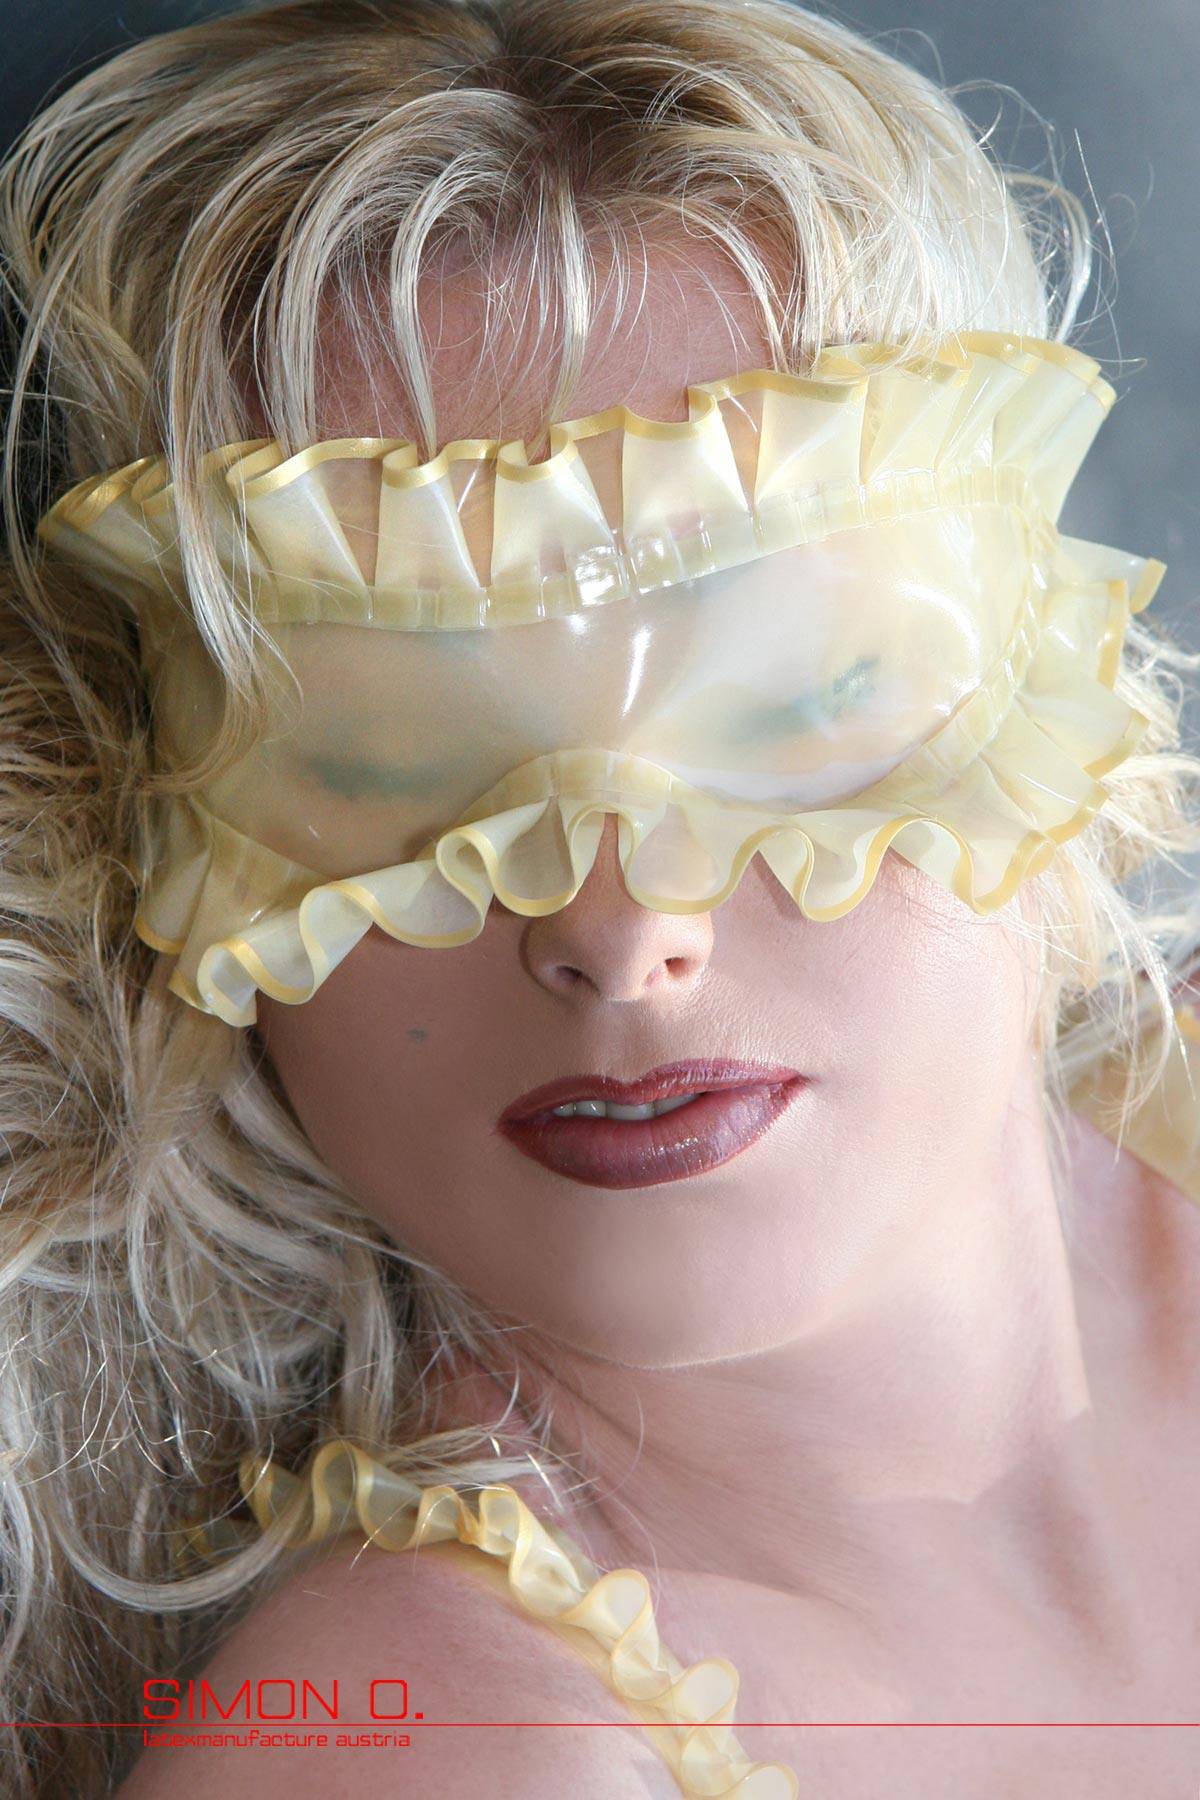 A blonde lady with red lips wears a latex blindfold